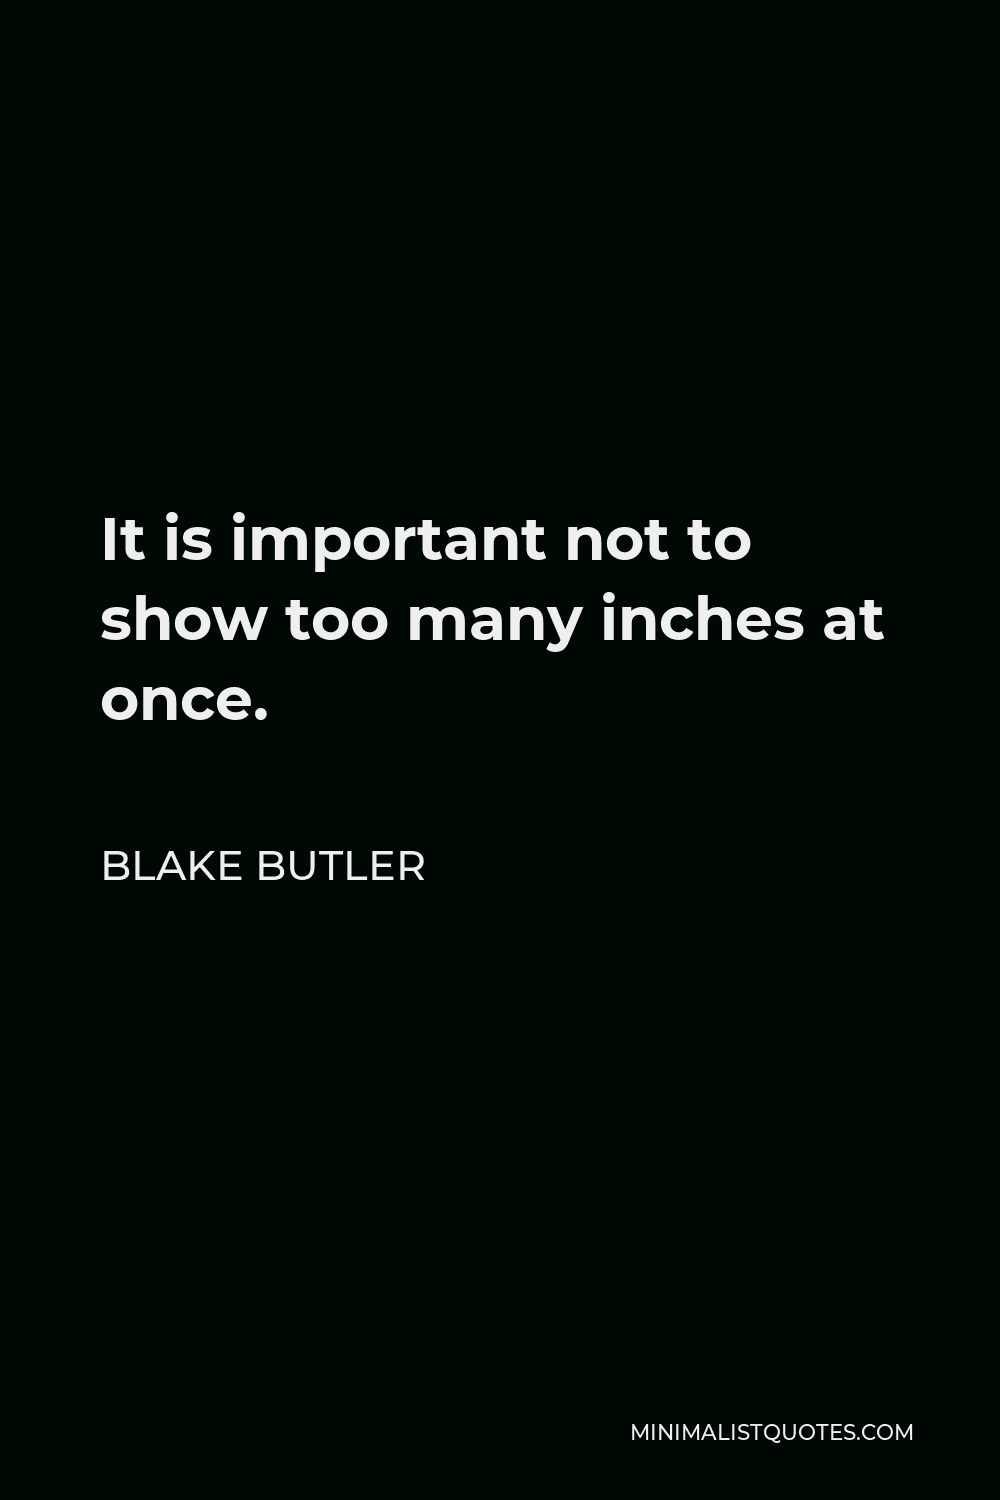 Blake Butler Quote - It is important not to show too many inches at once.